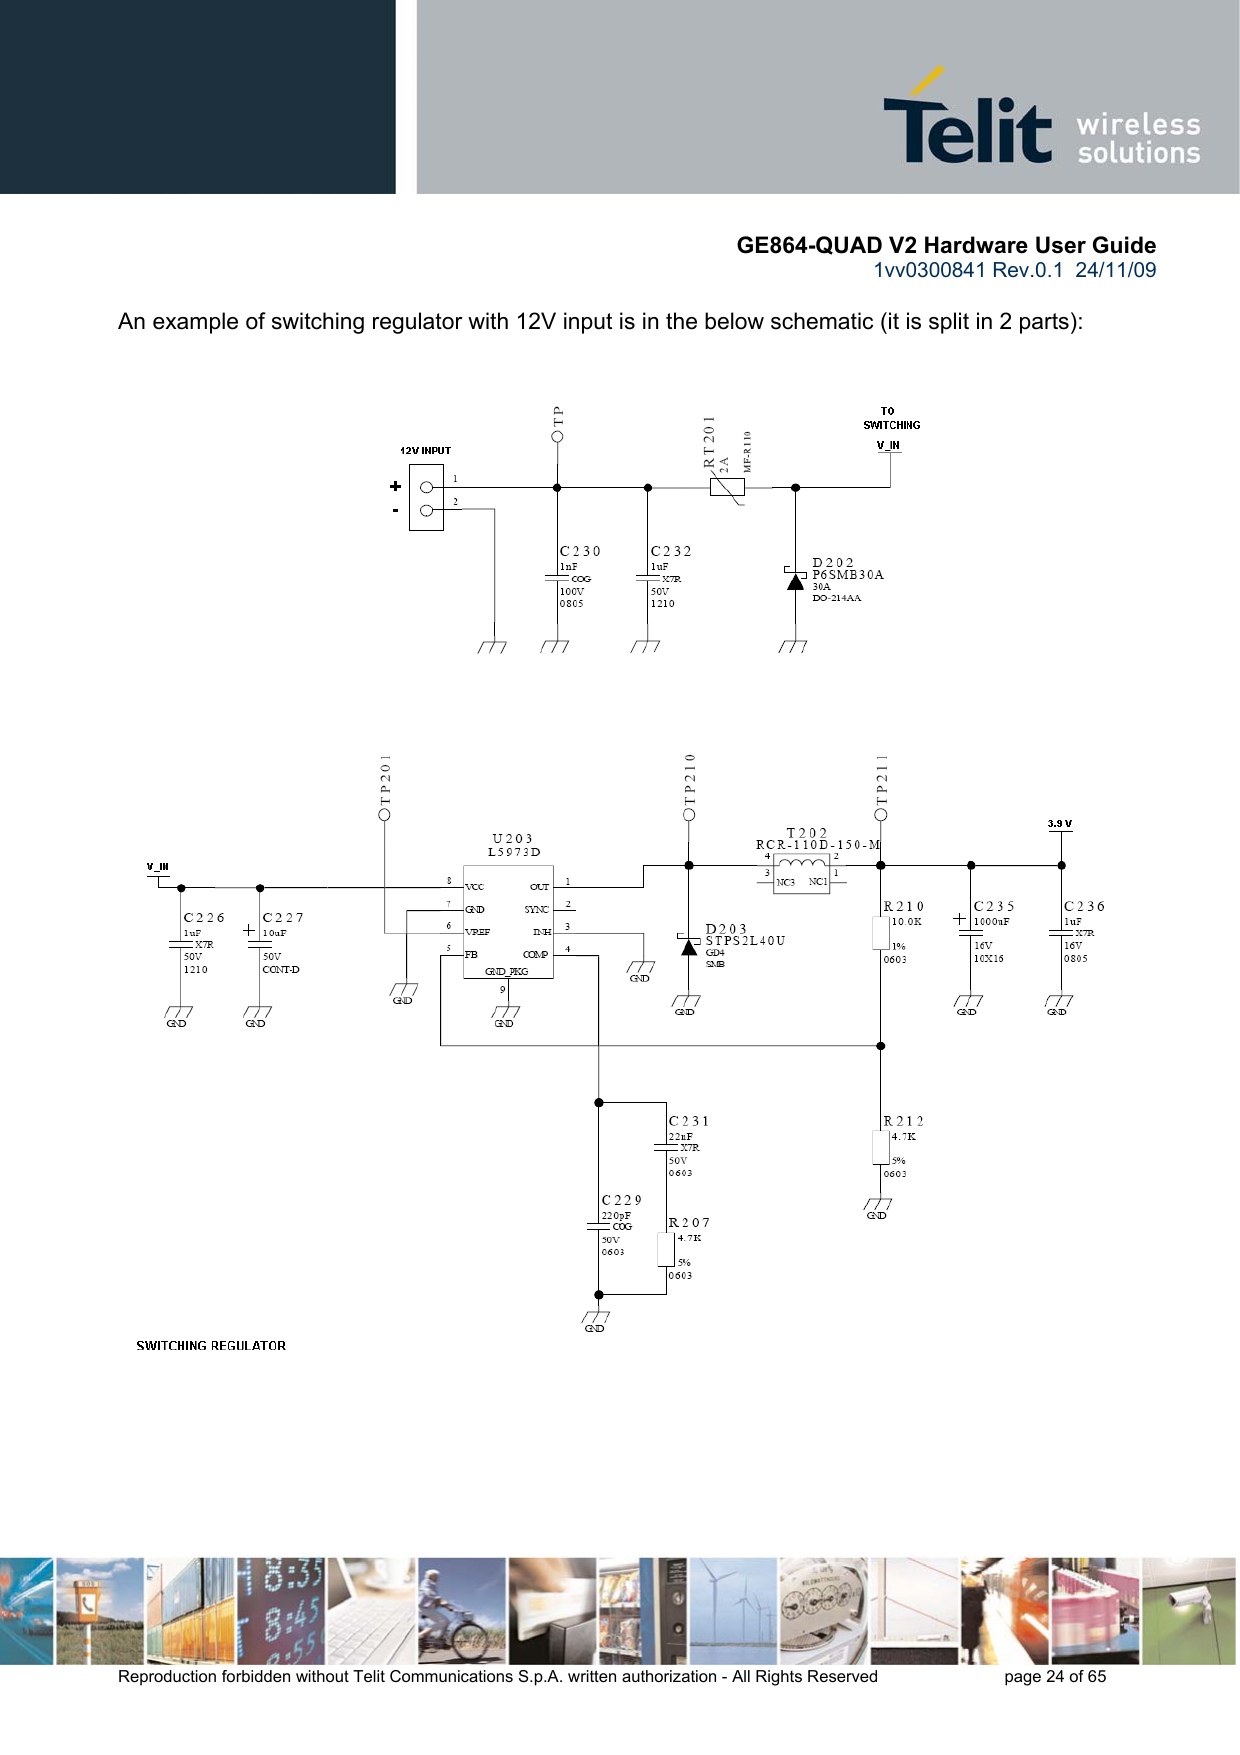       GE864-QUAD V2 Hardware User Guide 1vv0300841 Rev.0.1  24/11/09      Reproduction forbidden without Telit Communications S.p.A. written authorization - All Rights Reserved    page 24 of 65   An example of switching regulator with 12V input is in the below schematic (it is split in 2 parts):          